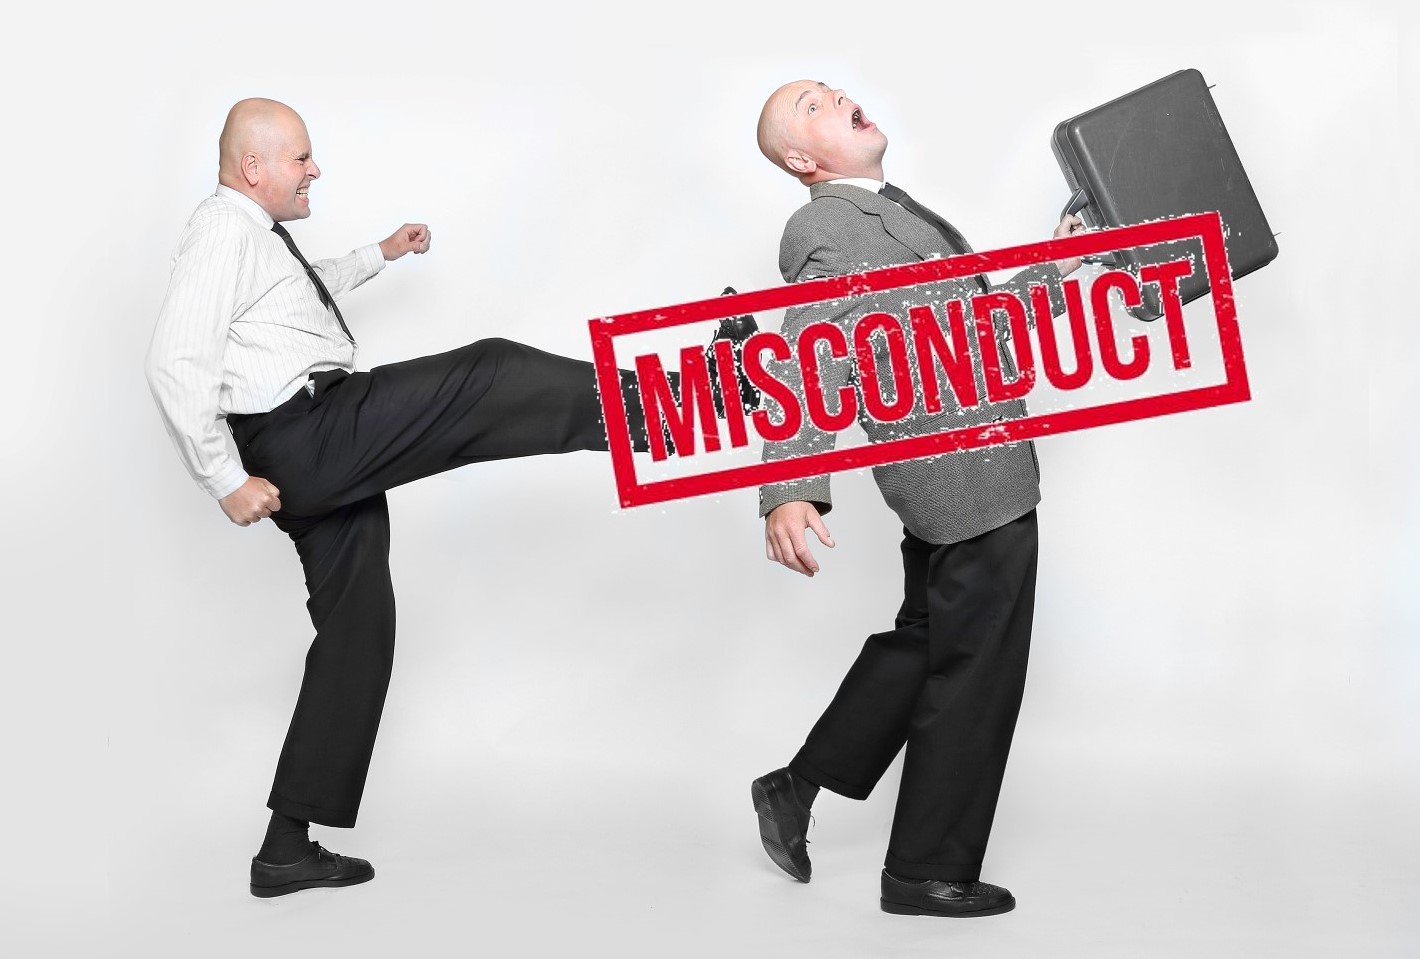 4 employee misconduct guidelines to prevent employee sue you during termination | Blog